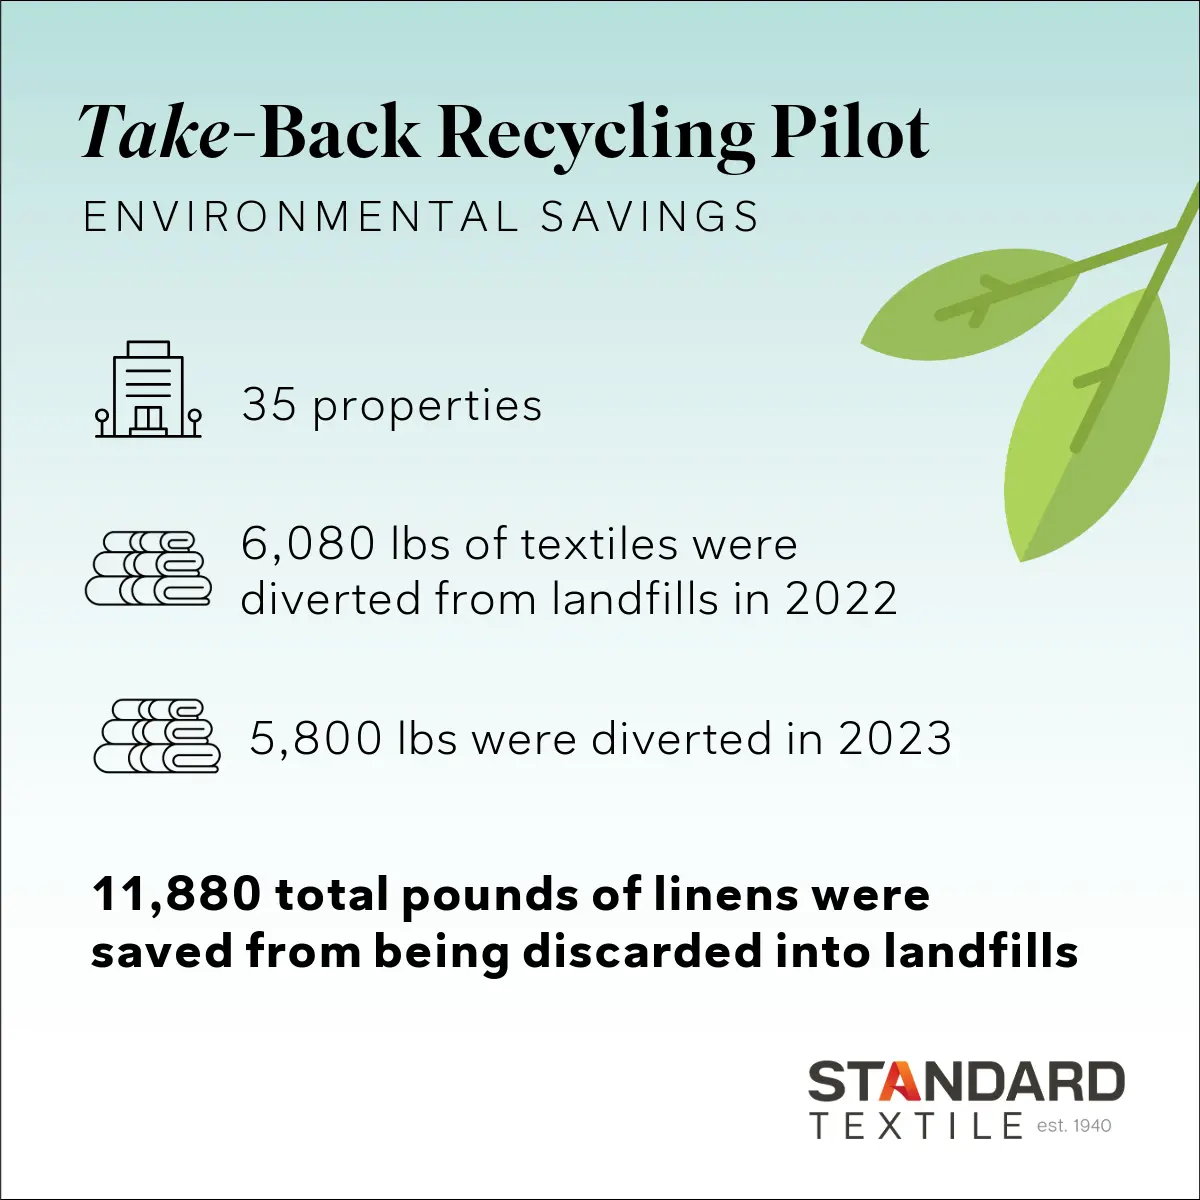 Take-Back Recycling Pilot Environmental Savings -35 properties -6,080 lbs of textiles werediverted from landfills in 2022 -5,800 lbs were diverted in 2023 11,880 total pounds of linens were saved from being discarded into landfills